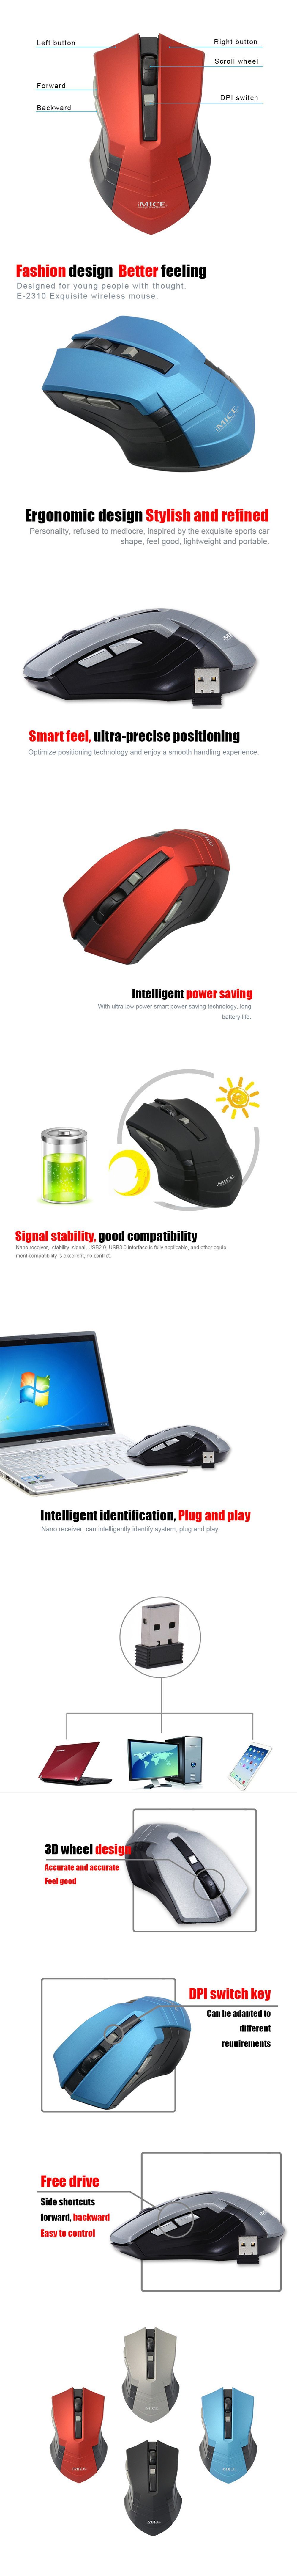 IMICE-E-2310-Rechargeable-24GHz-Wireless-1600DPI-Mouse-Multi-colored-Mouse-for-Laptops-Computers-1592706